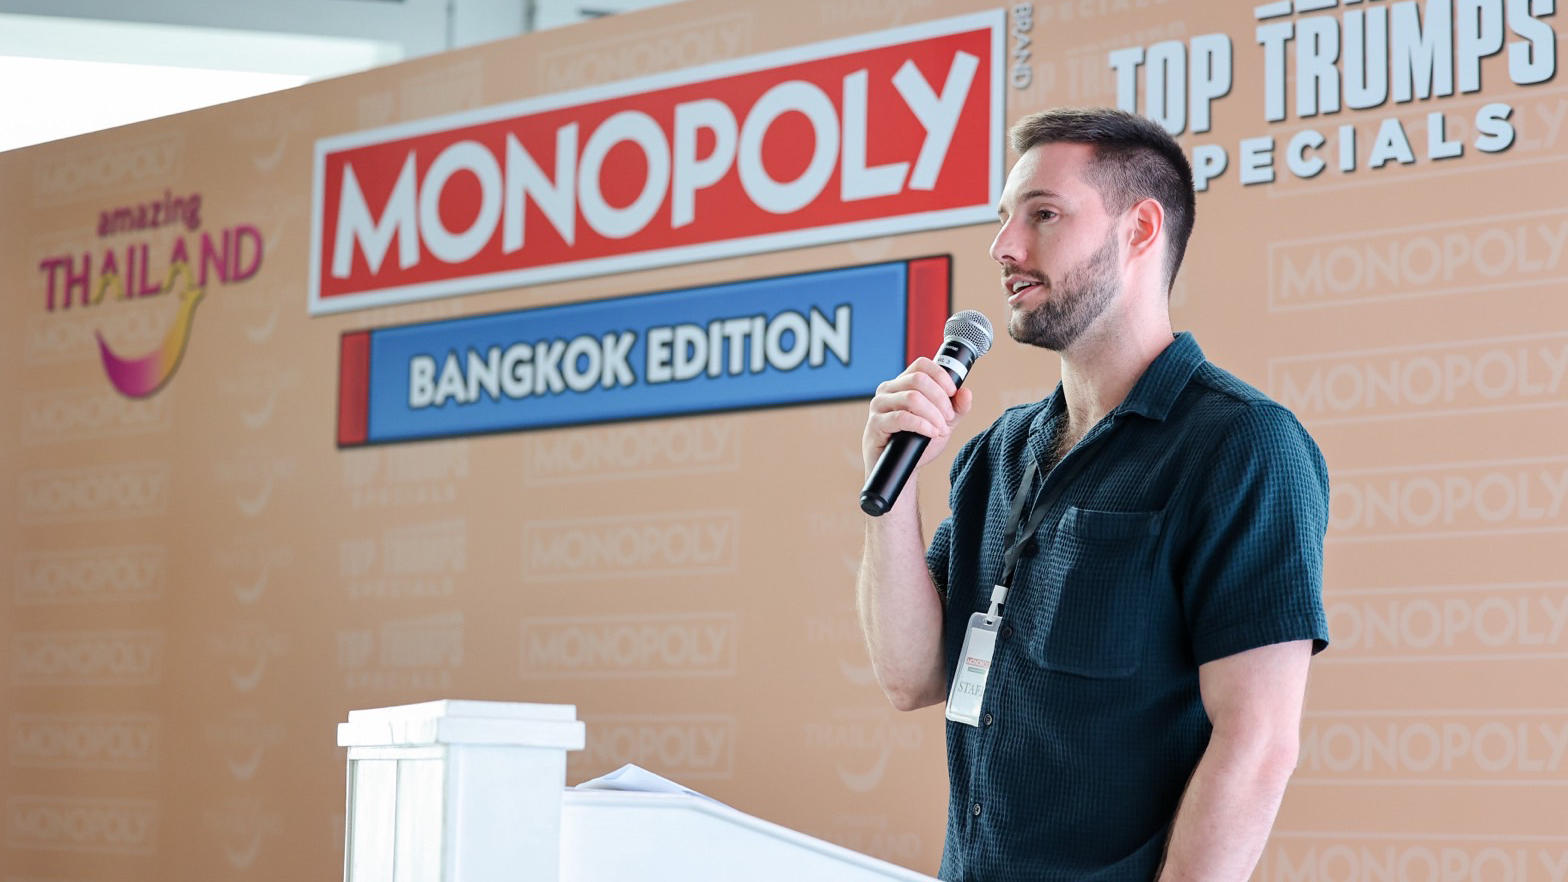 Mr. Jake Houghton, Territory Head of Asia at Winning Moves